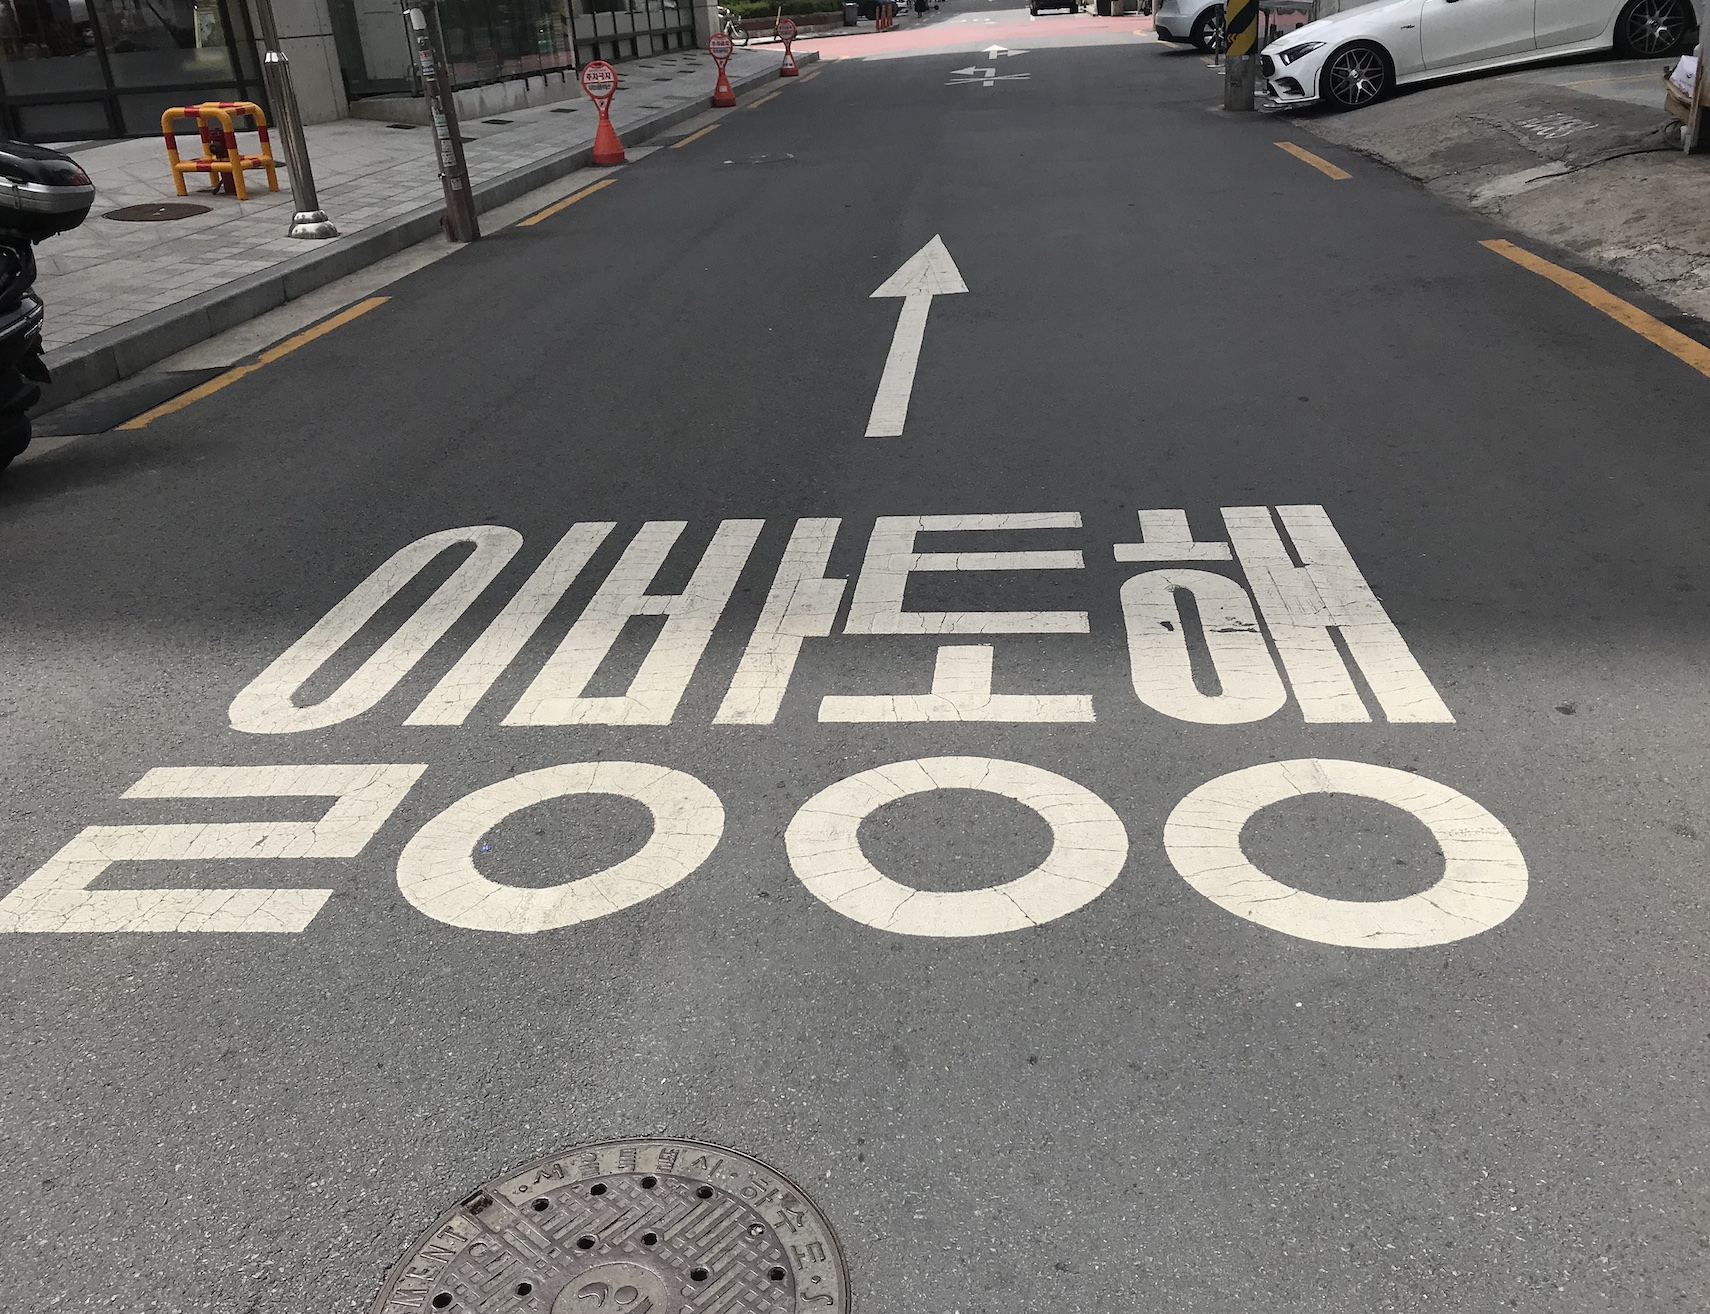 One way sign in Korean